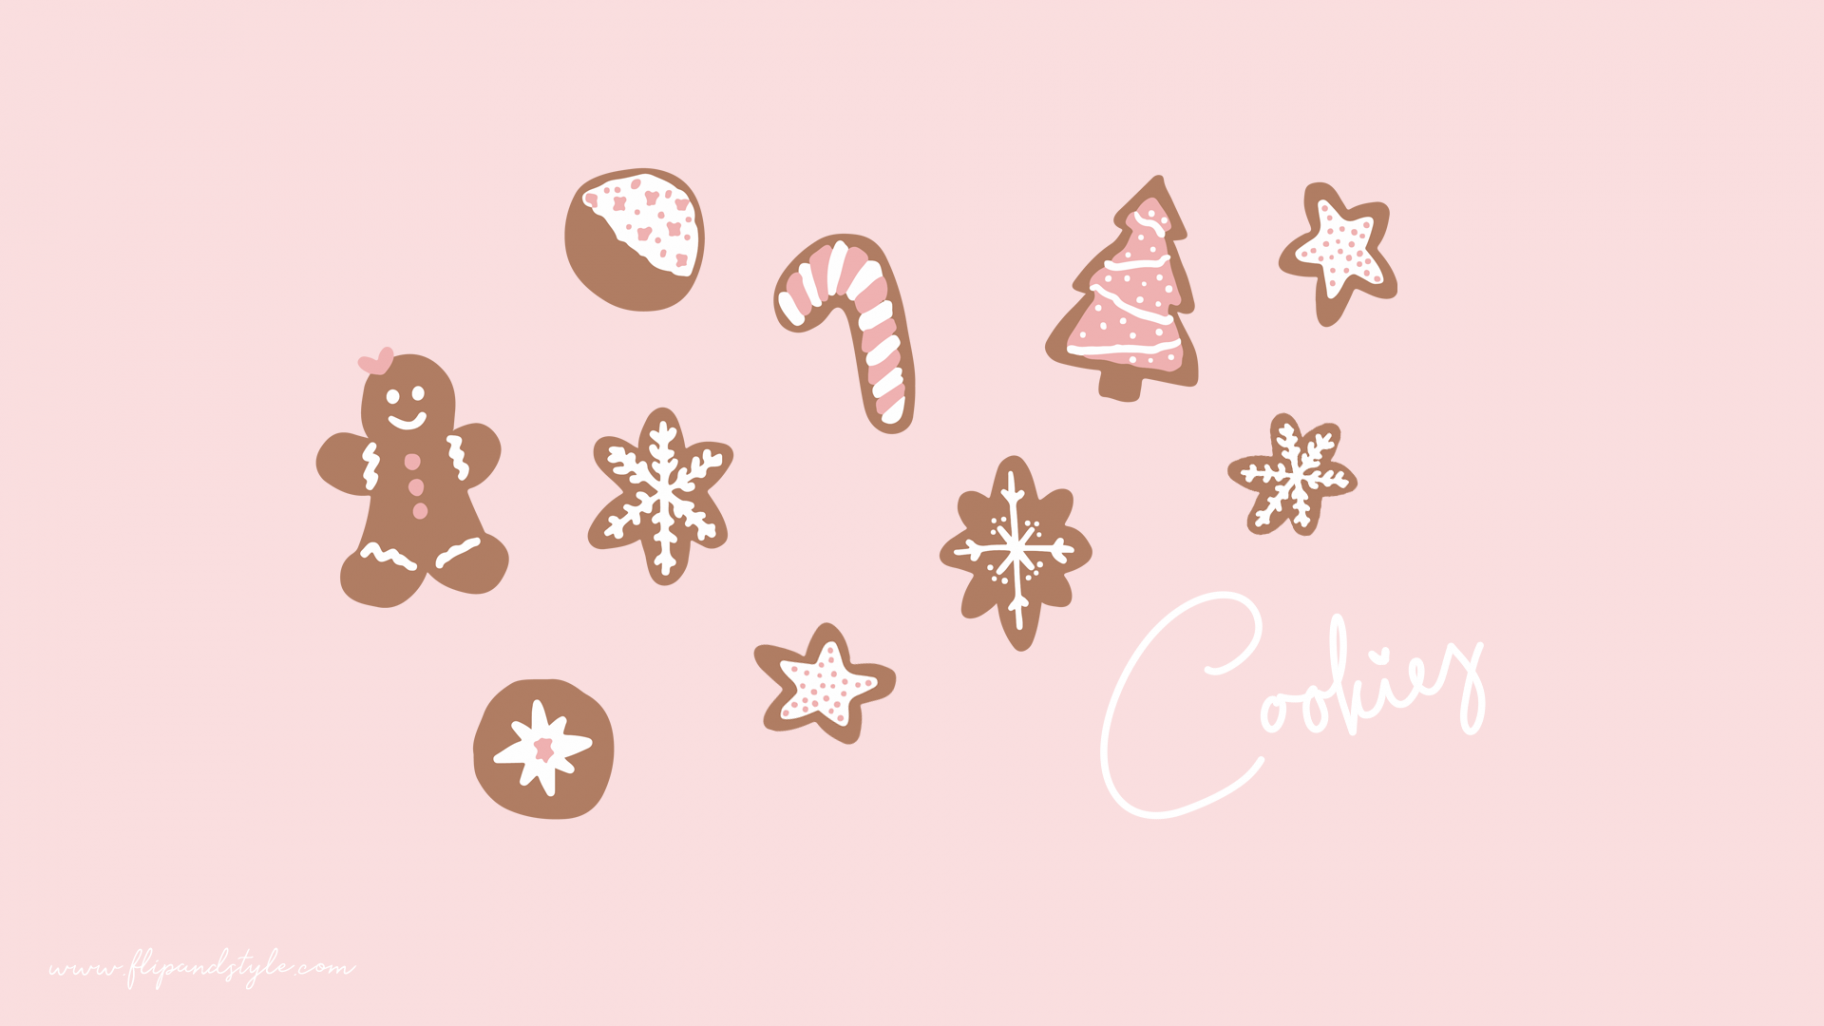 Free Wallpapers & Backgrounds - Christmas, Festive by Flip And